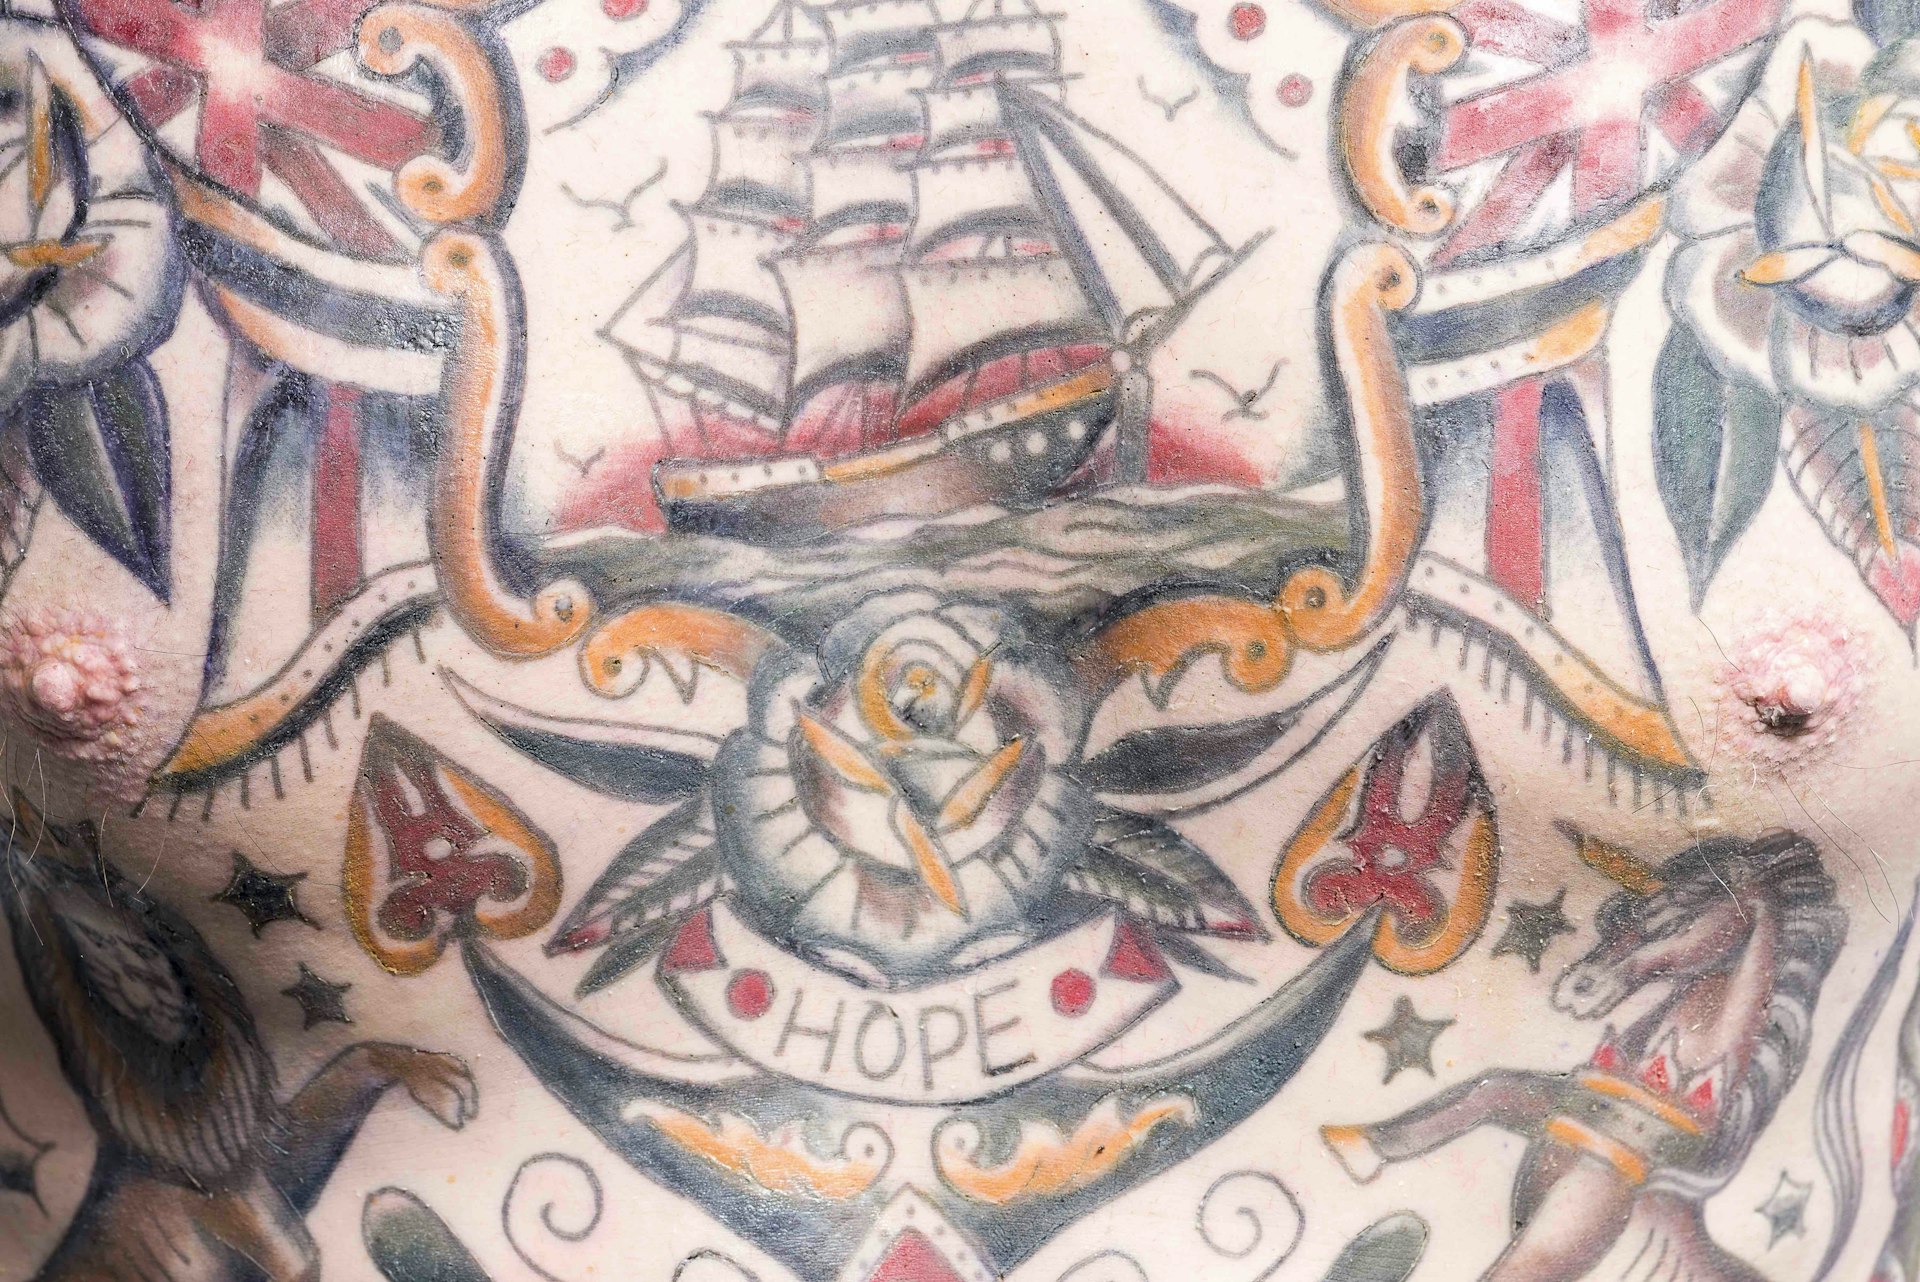 A brief history of the British tattoo